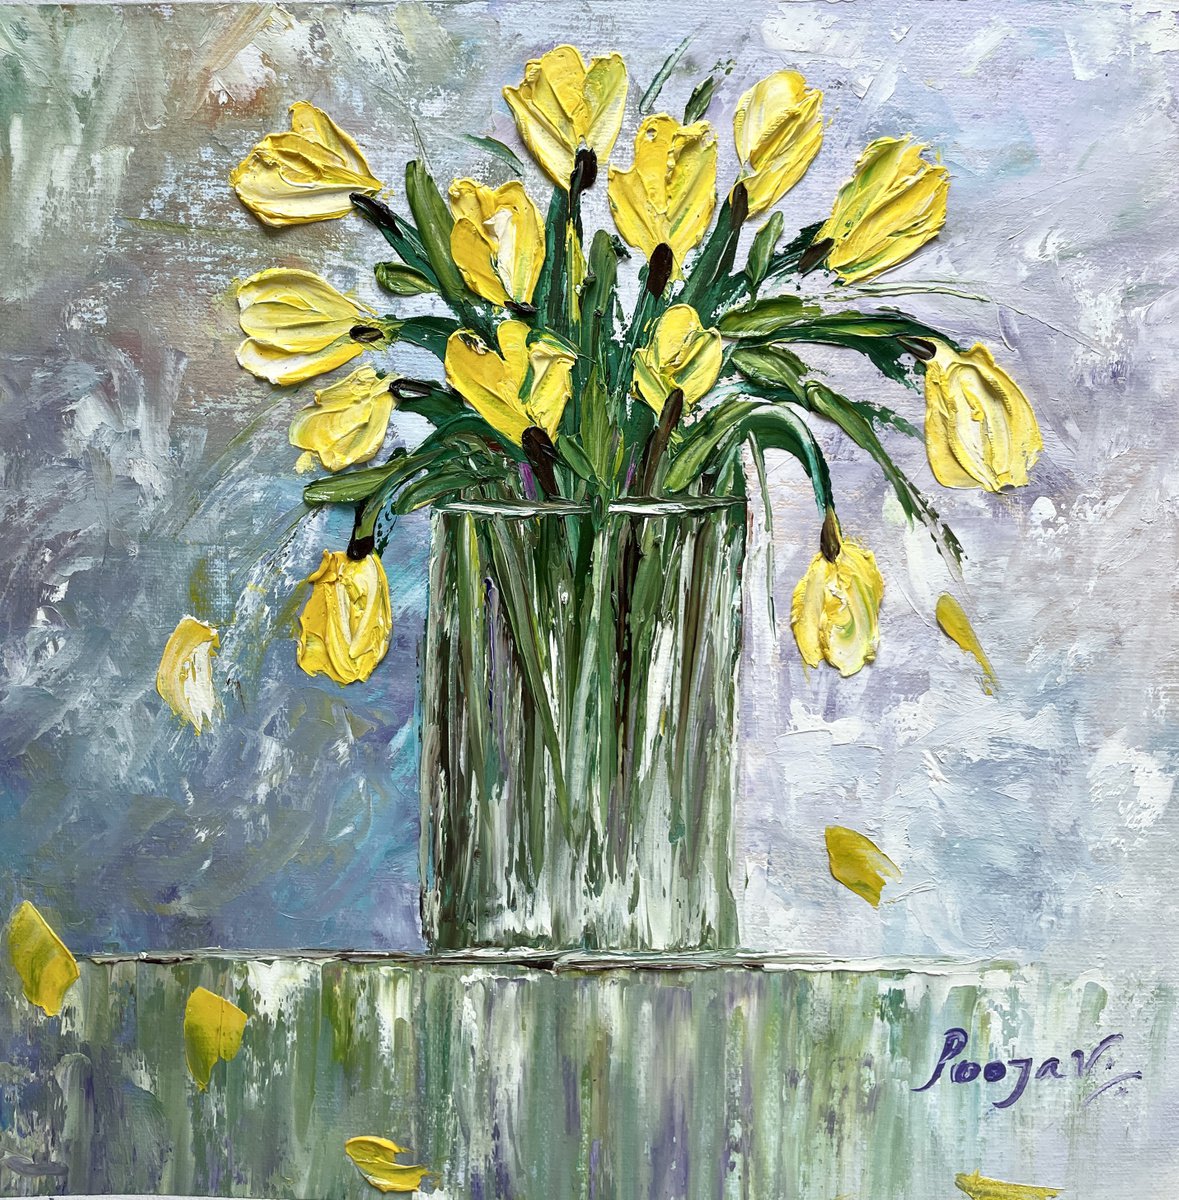 Bound to Bloom - Yellow Tulips by Pooja Verma